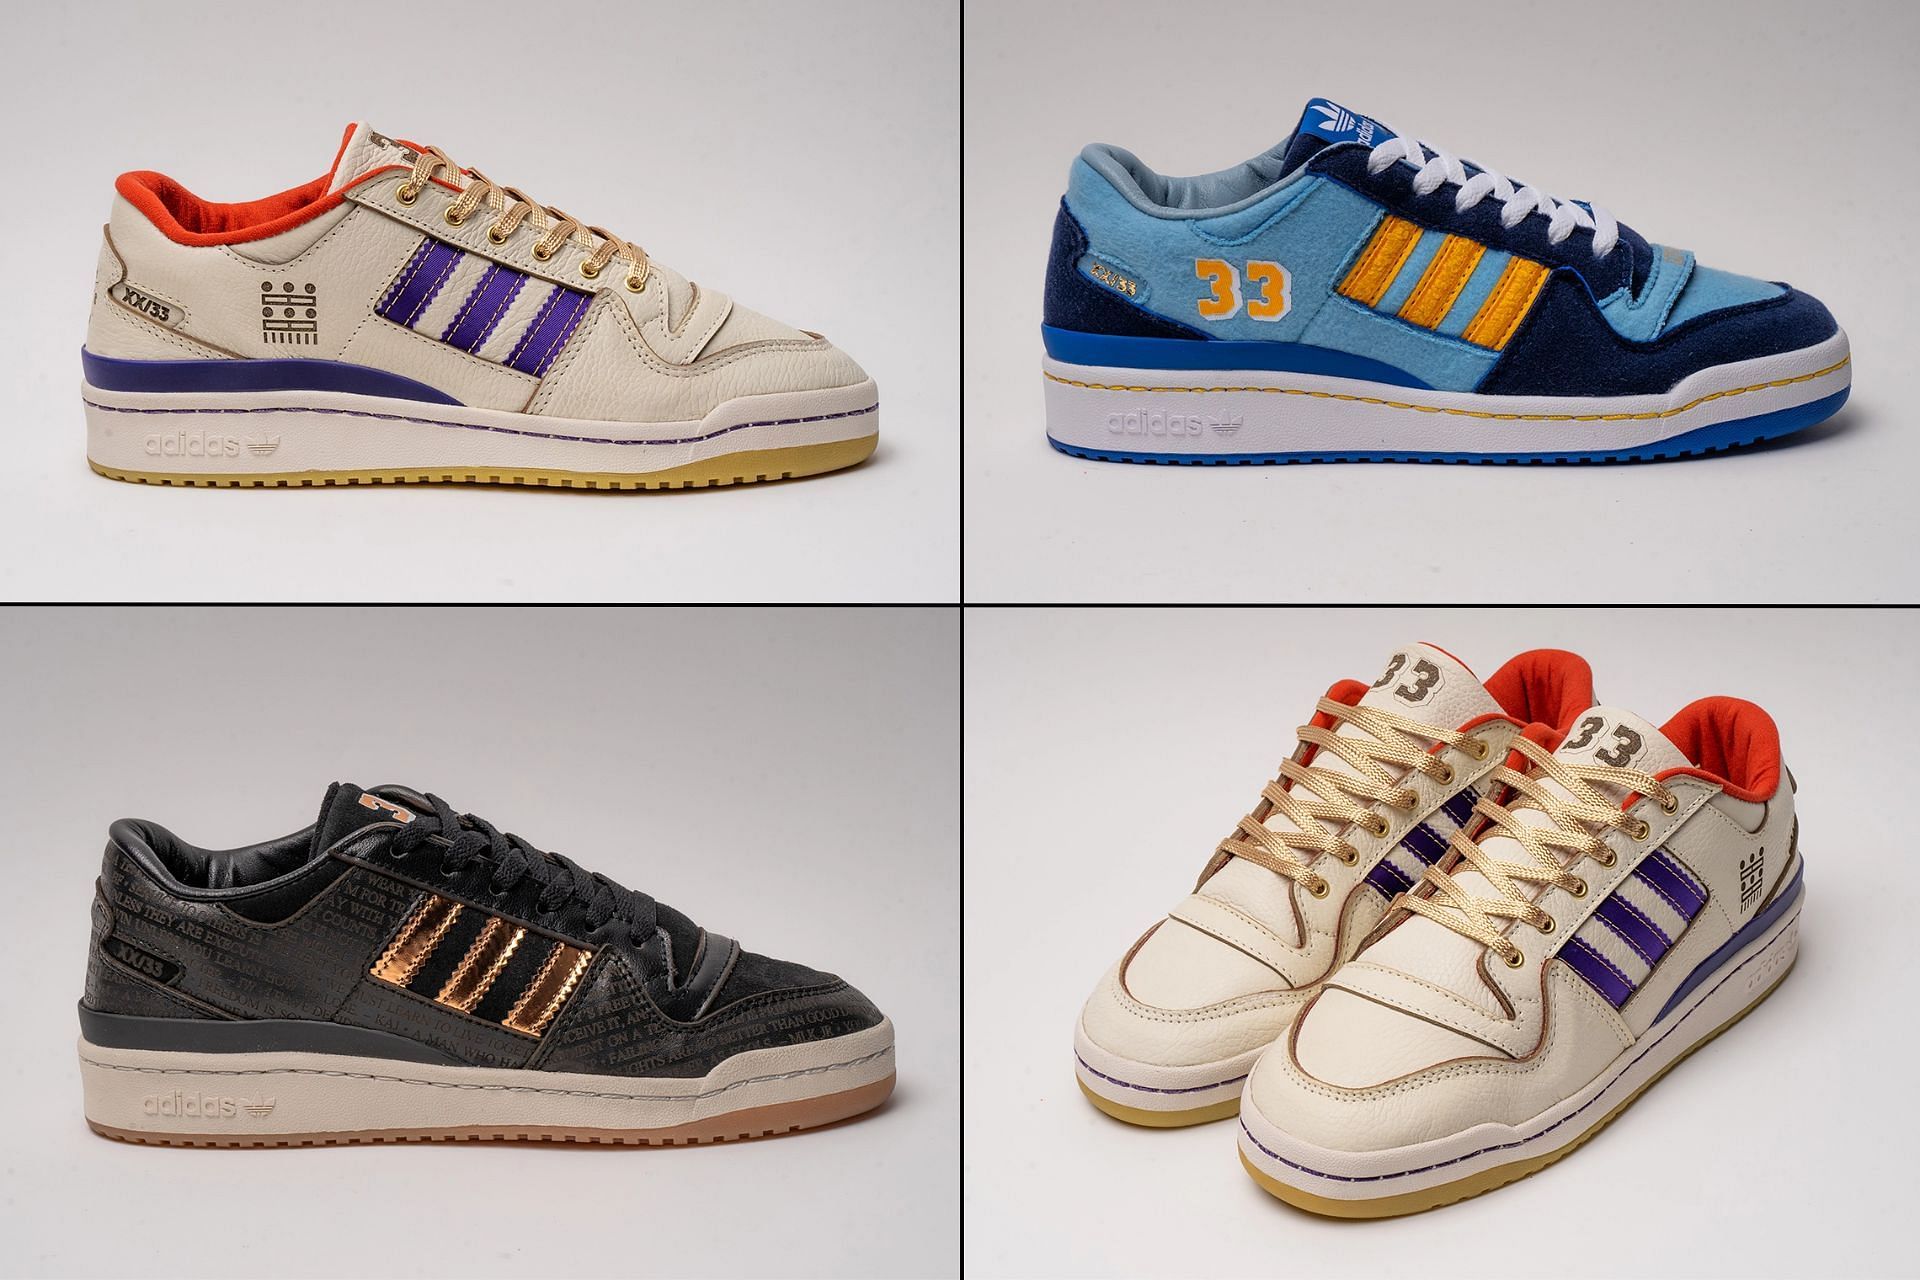 Adidas Kareem Abdul-Jabbar "Evolution Sneaker Collection: Where to buy, price, release date, and more